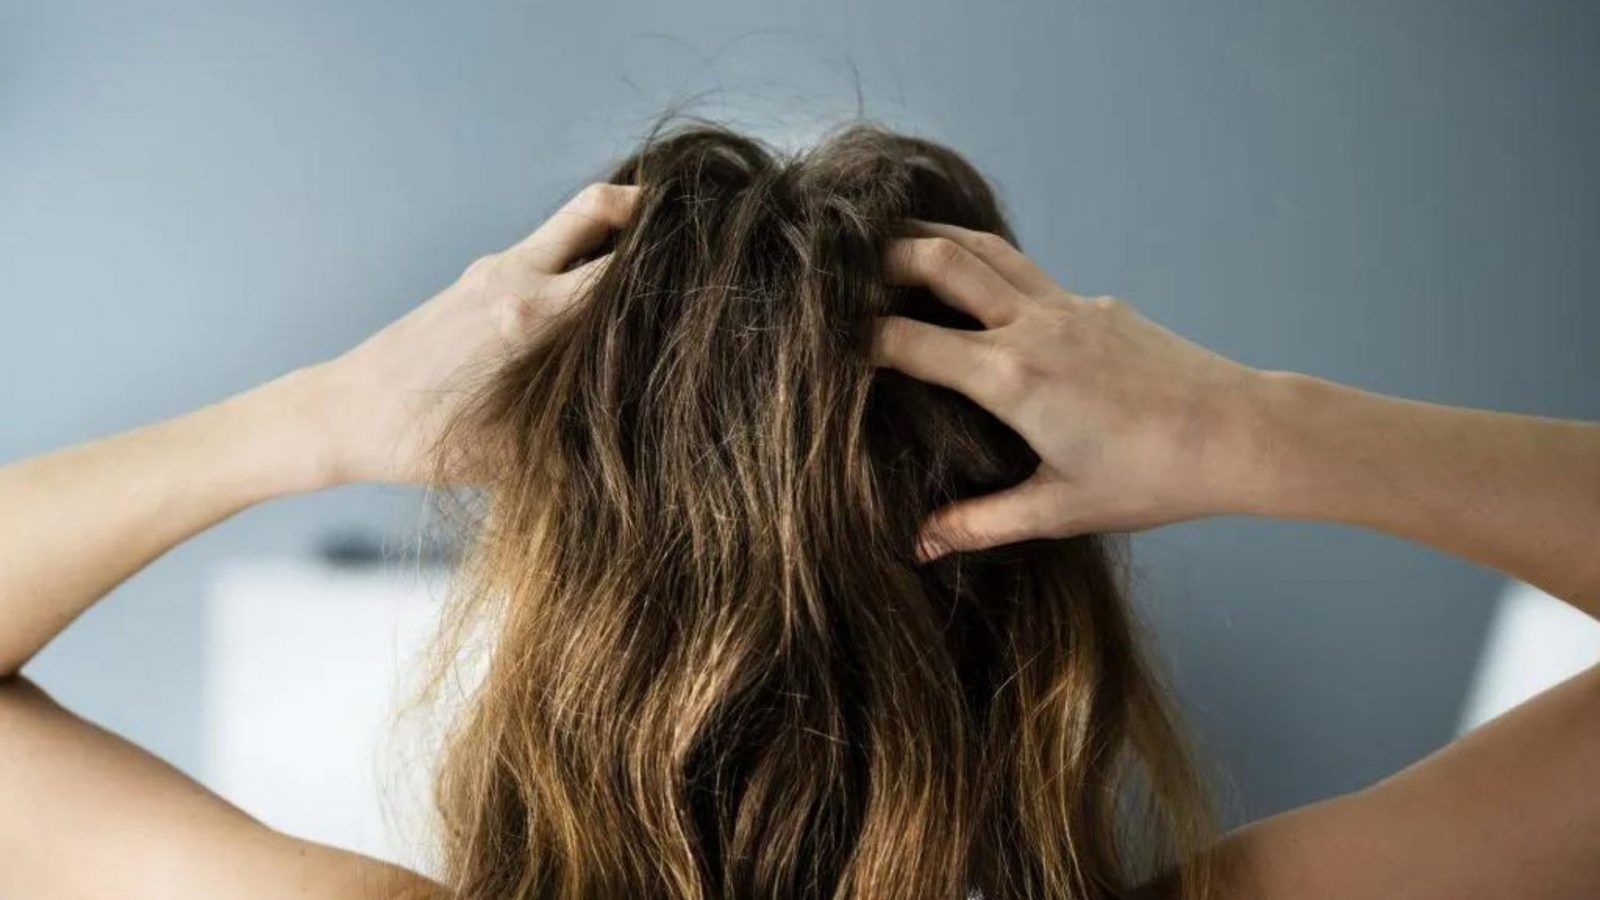 The causes of hair loss at the crown and how to prevent it, according to experts